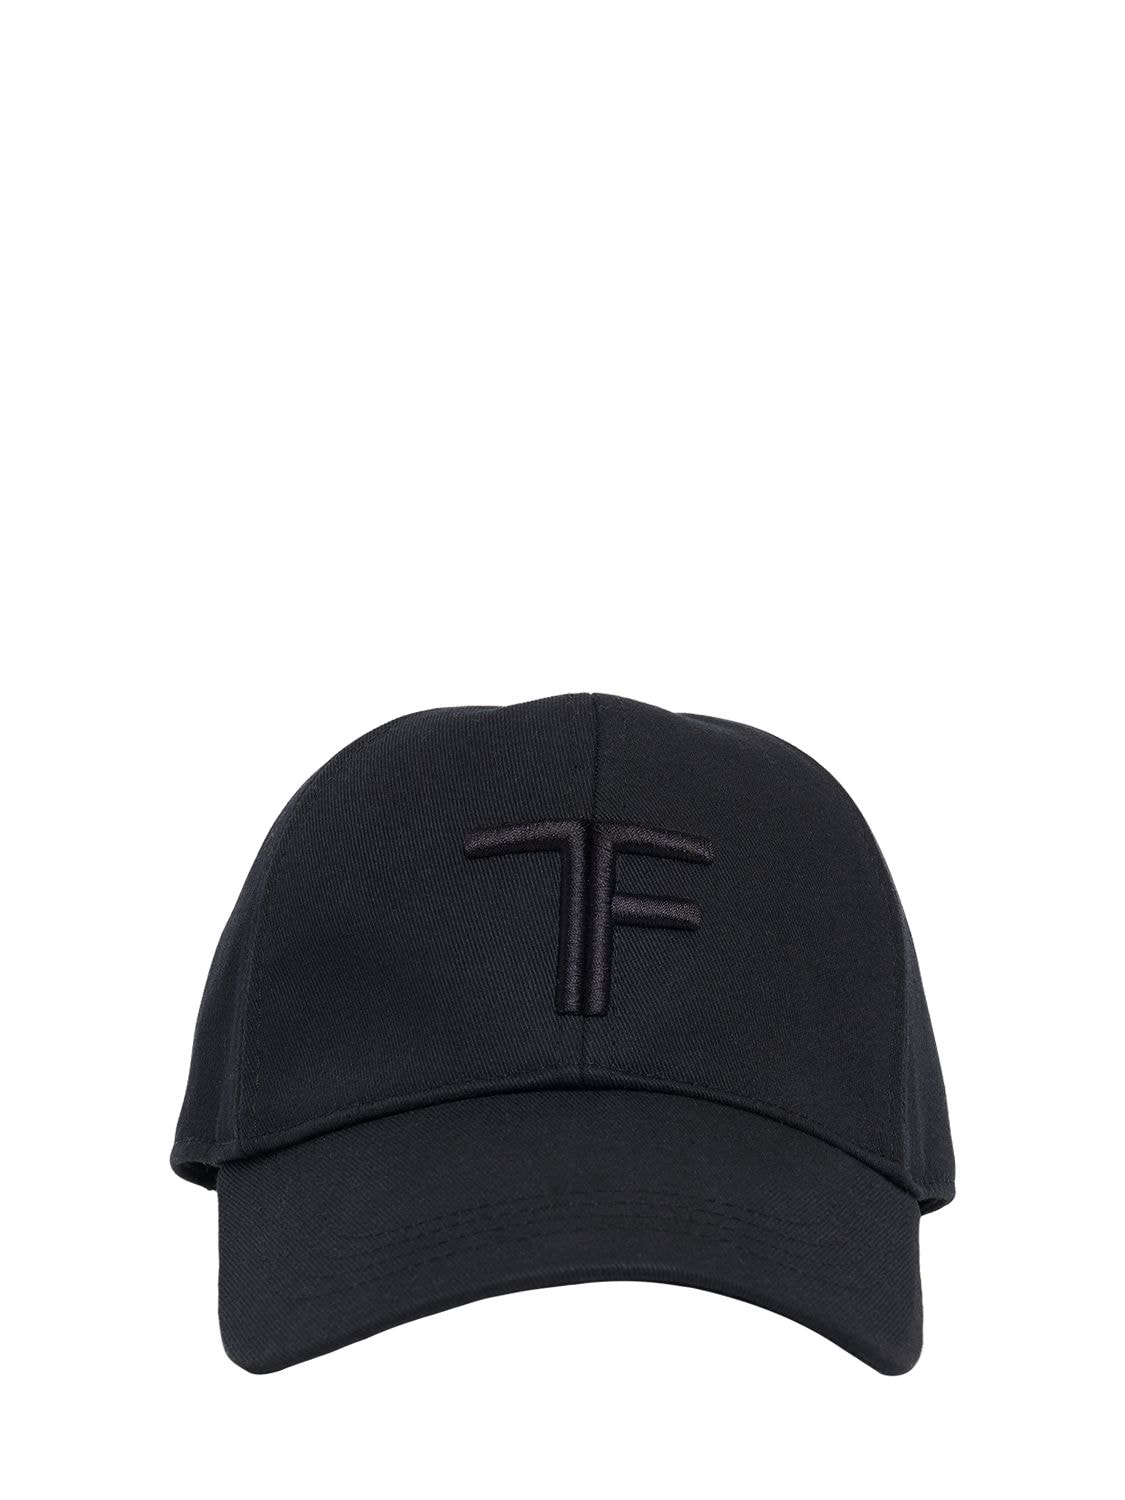 Tom Ford Canvas & Smooth Leather Cap In Black